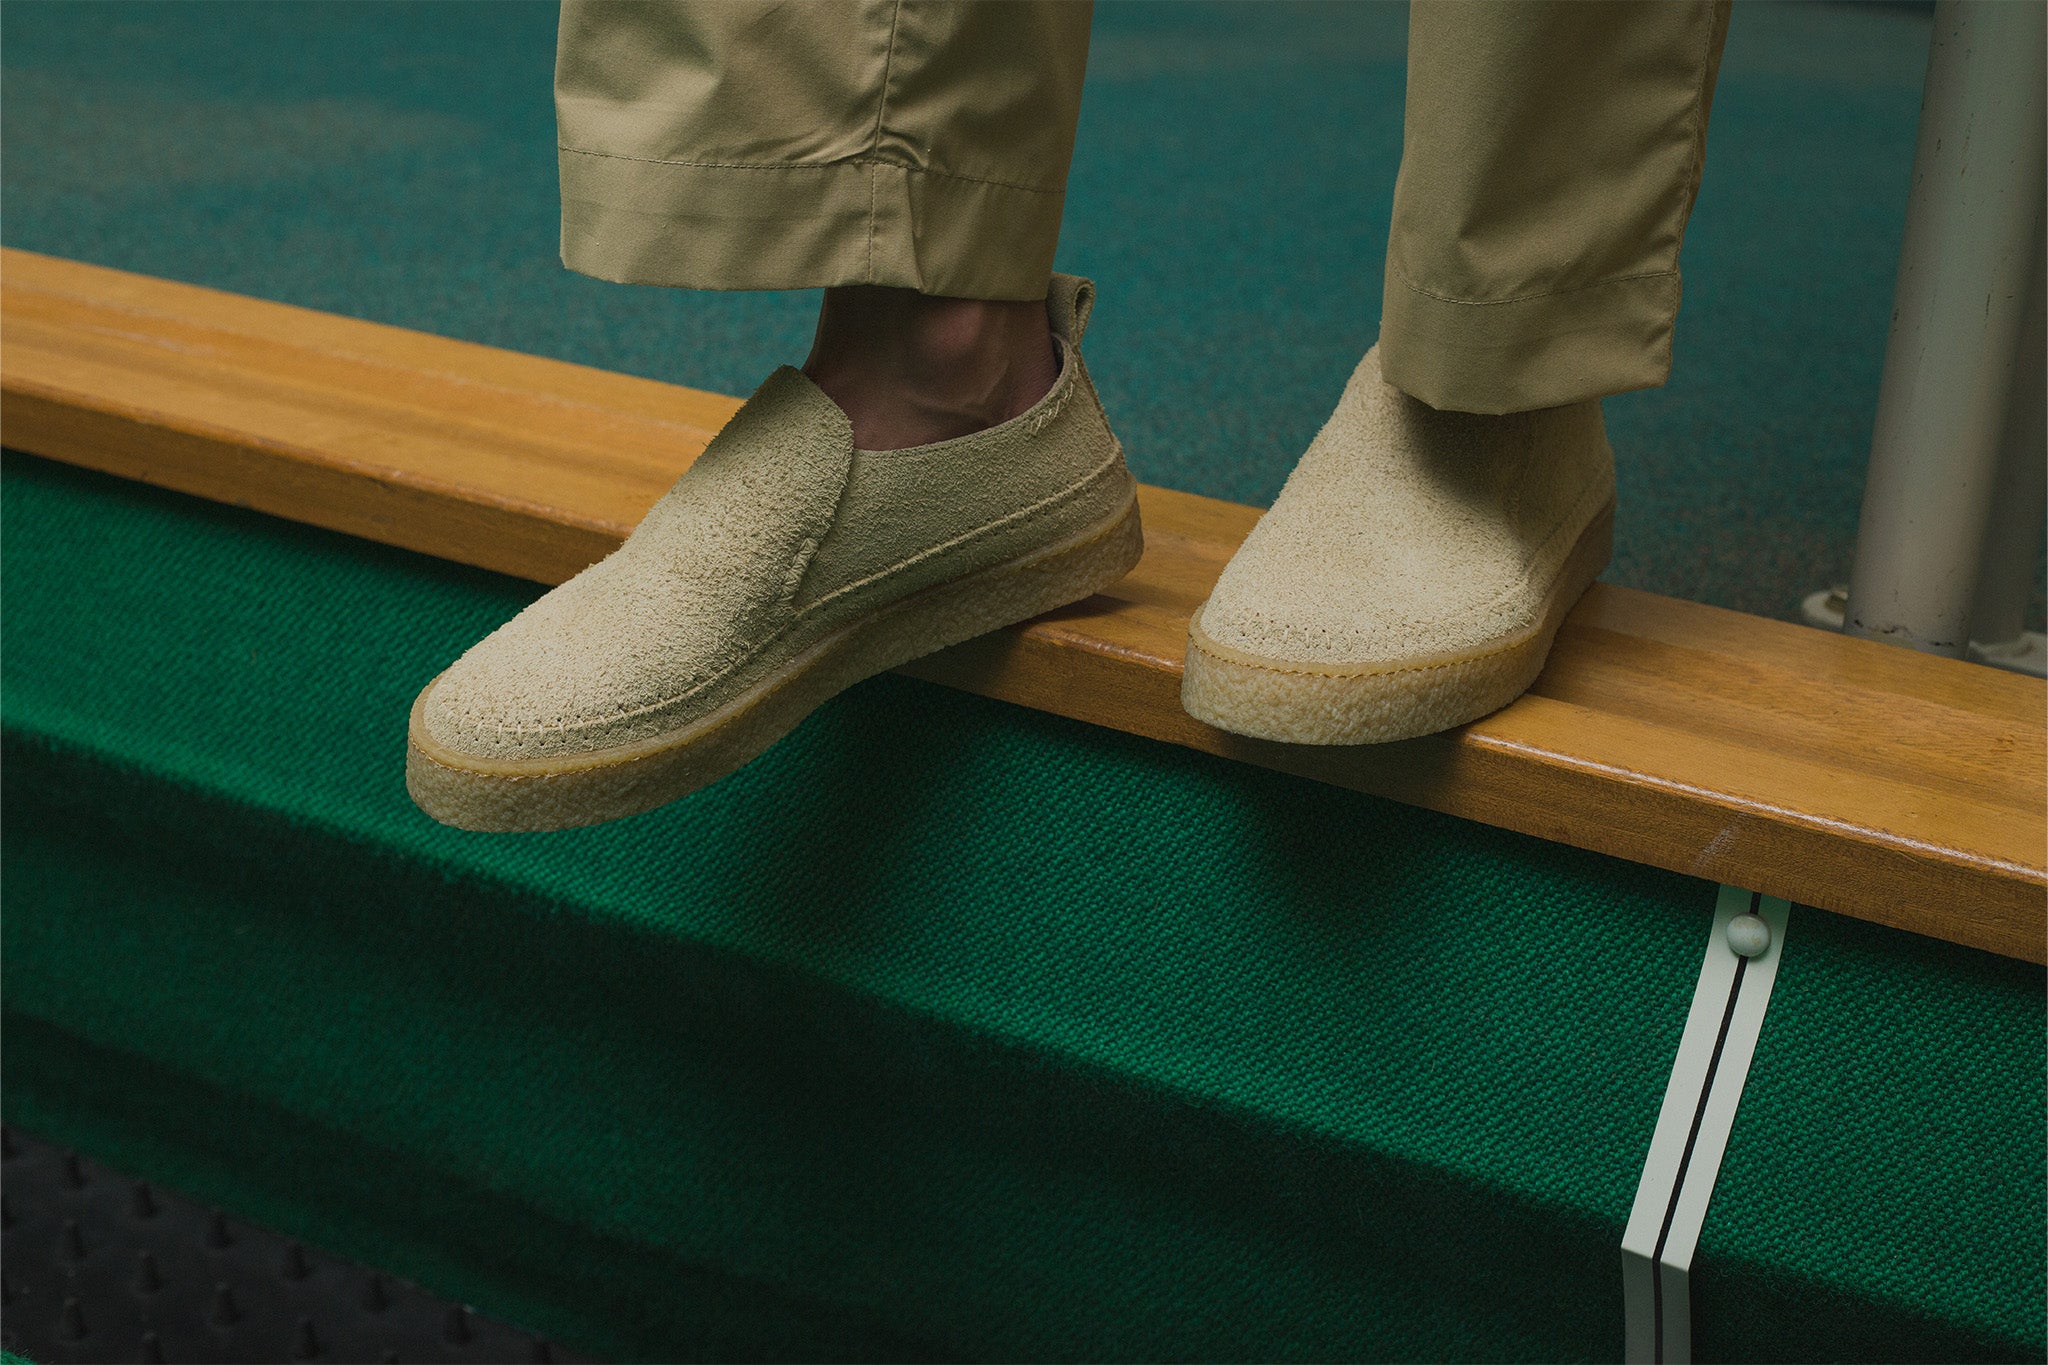 A close up photo of the Yogi Hitch Loafer in Sand Suede from the latest Yogi and Universal Works collaborative project.